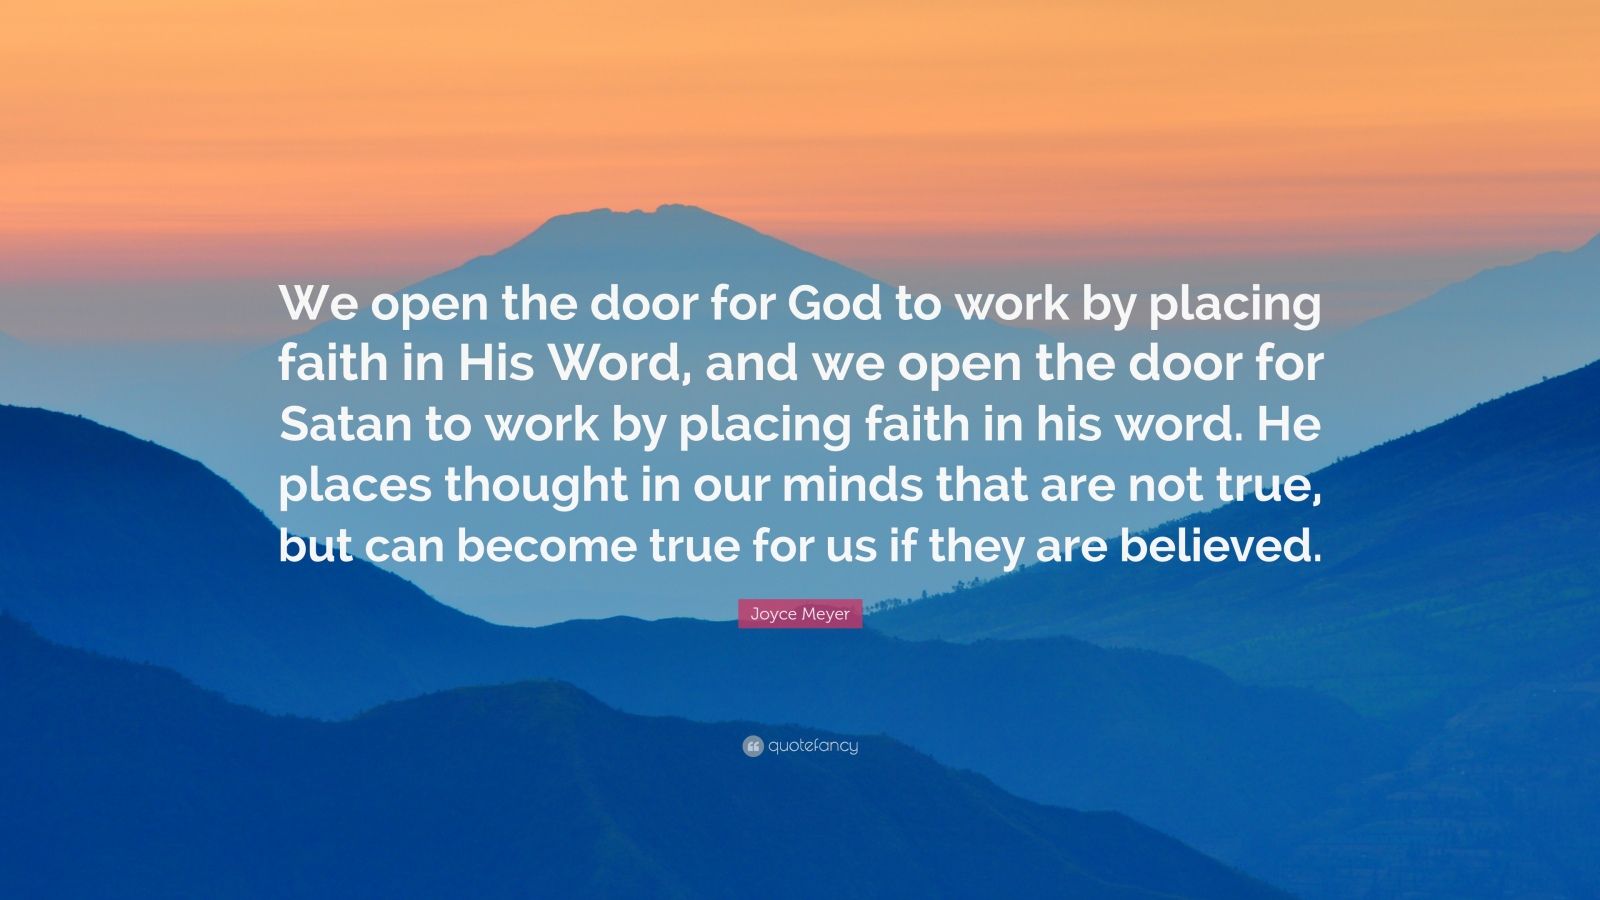 Joyce Meyer Quote: “We open the door for God to work by placing faith ...